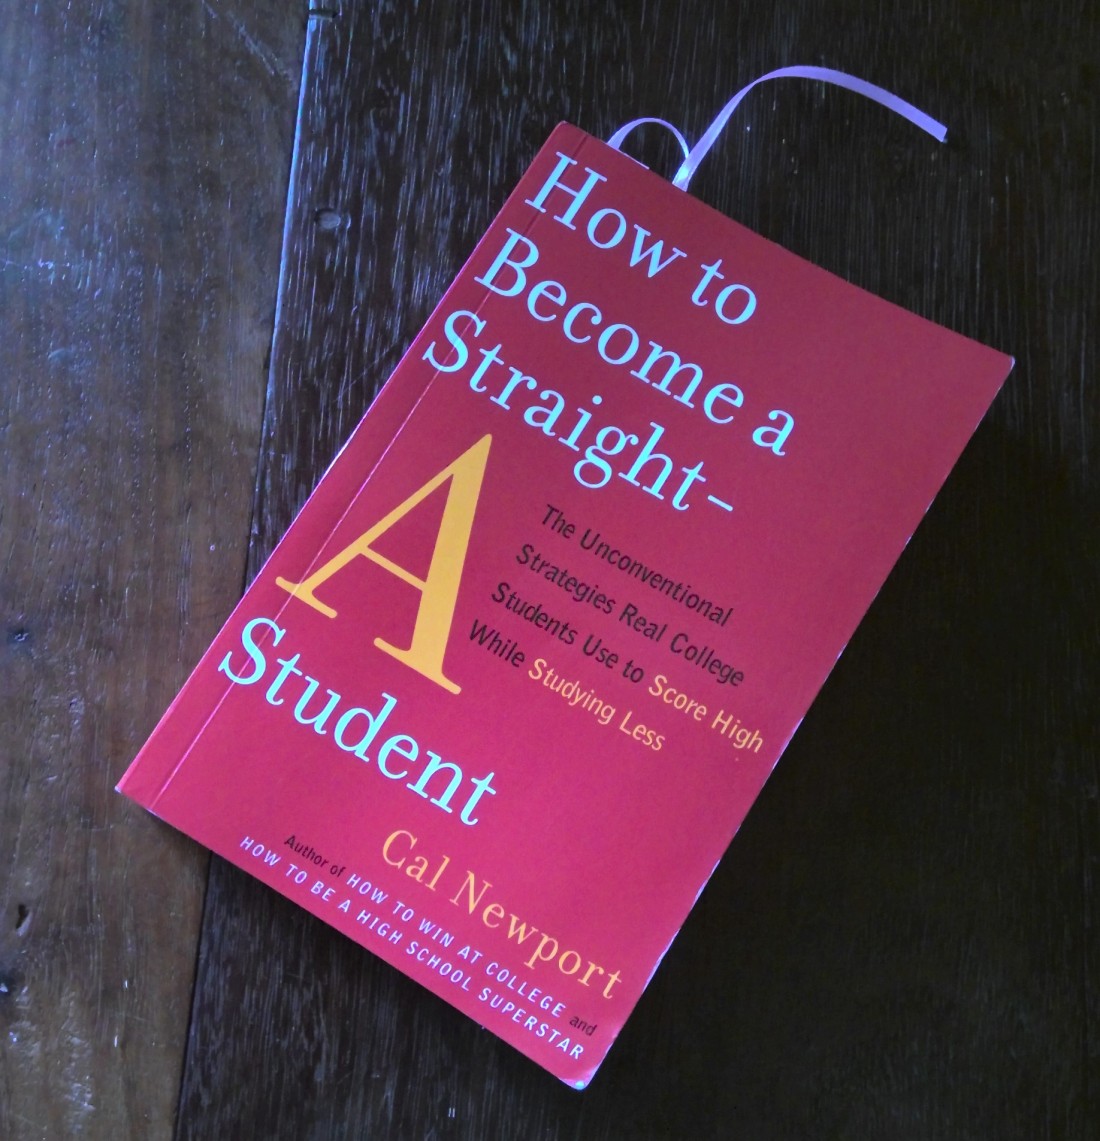  How to Become a Straight-A Student: The Unconventional